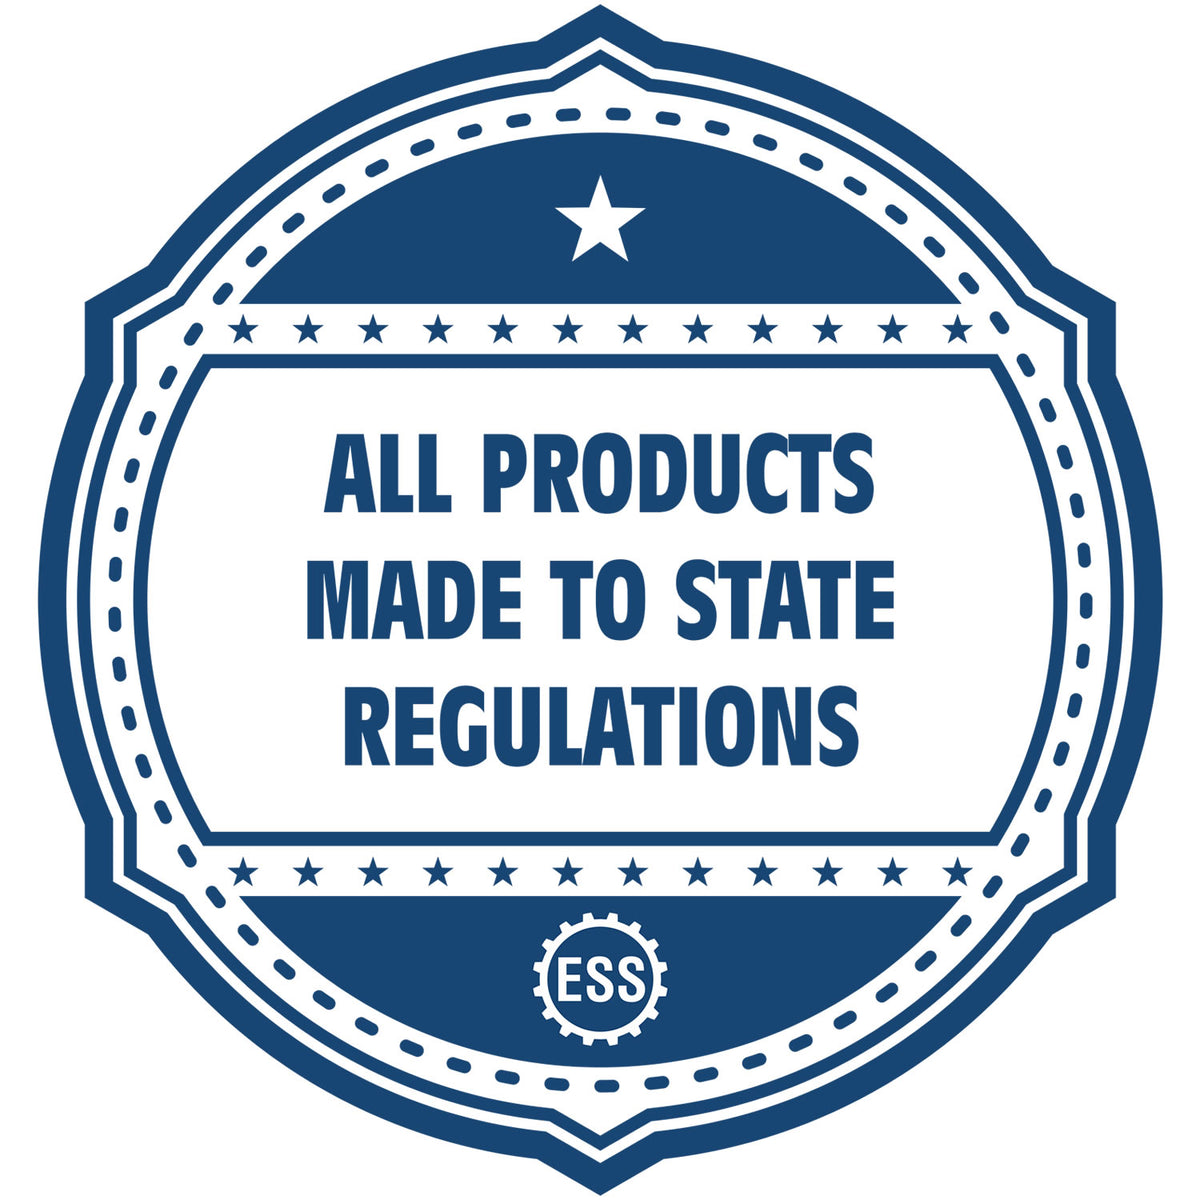 A blue icon or badge for the Gift New York Engineer Seal showing that this product is made in compliance with state regulations.